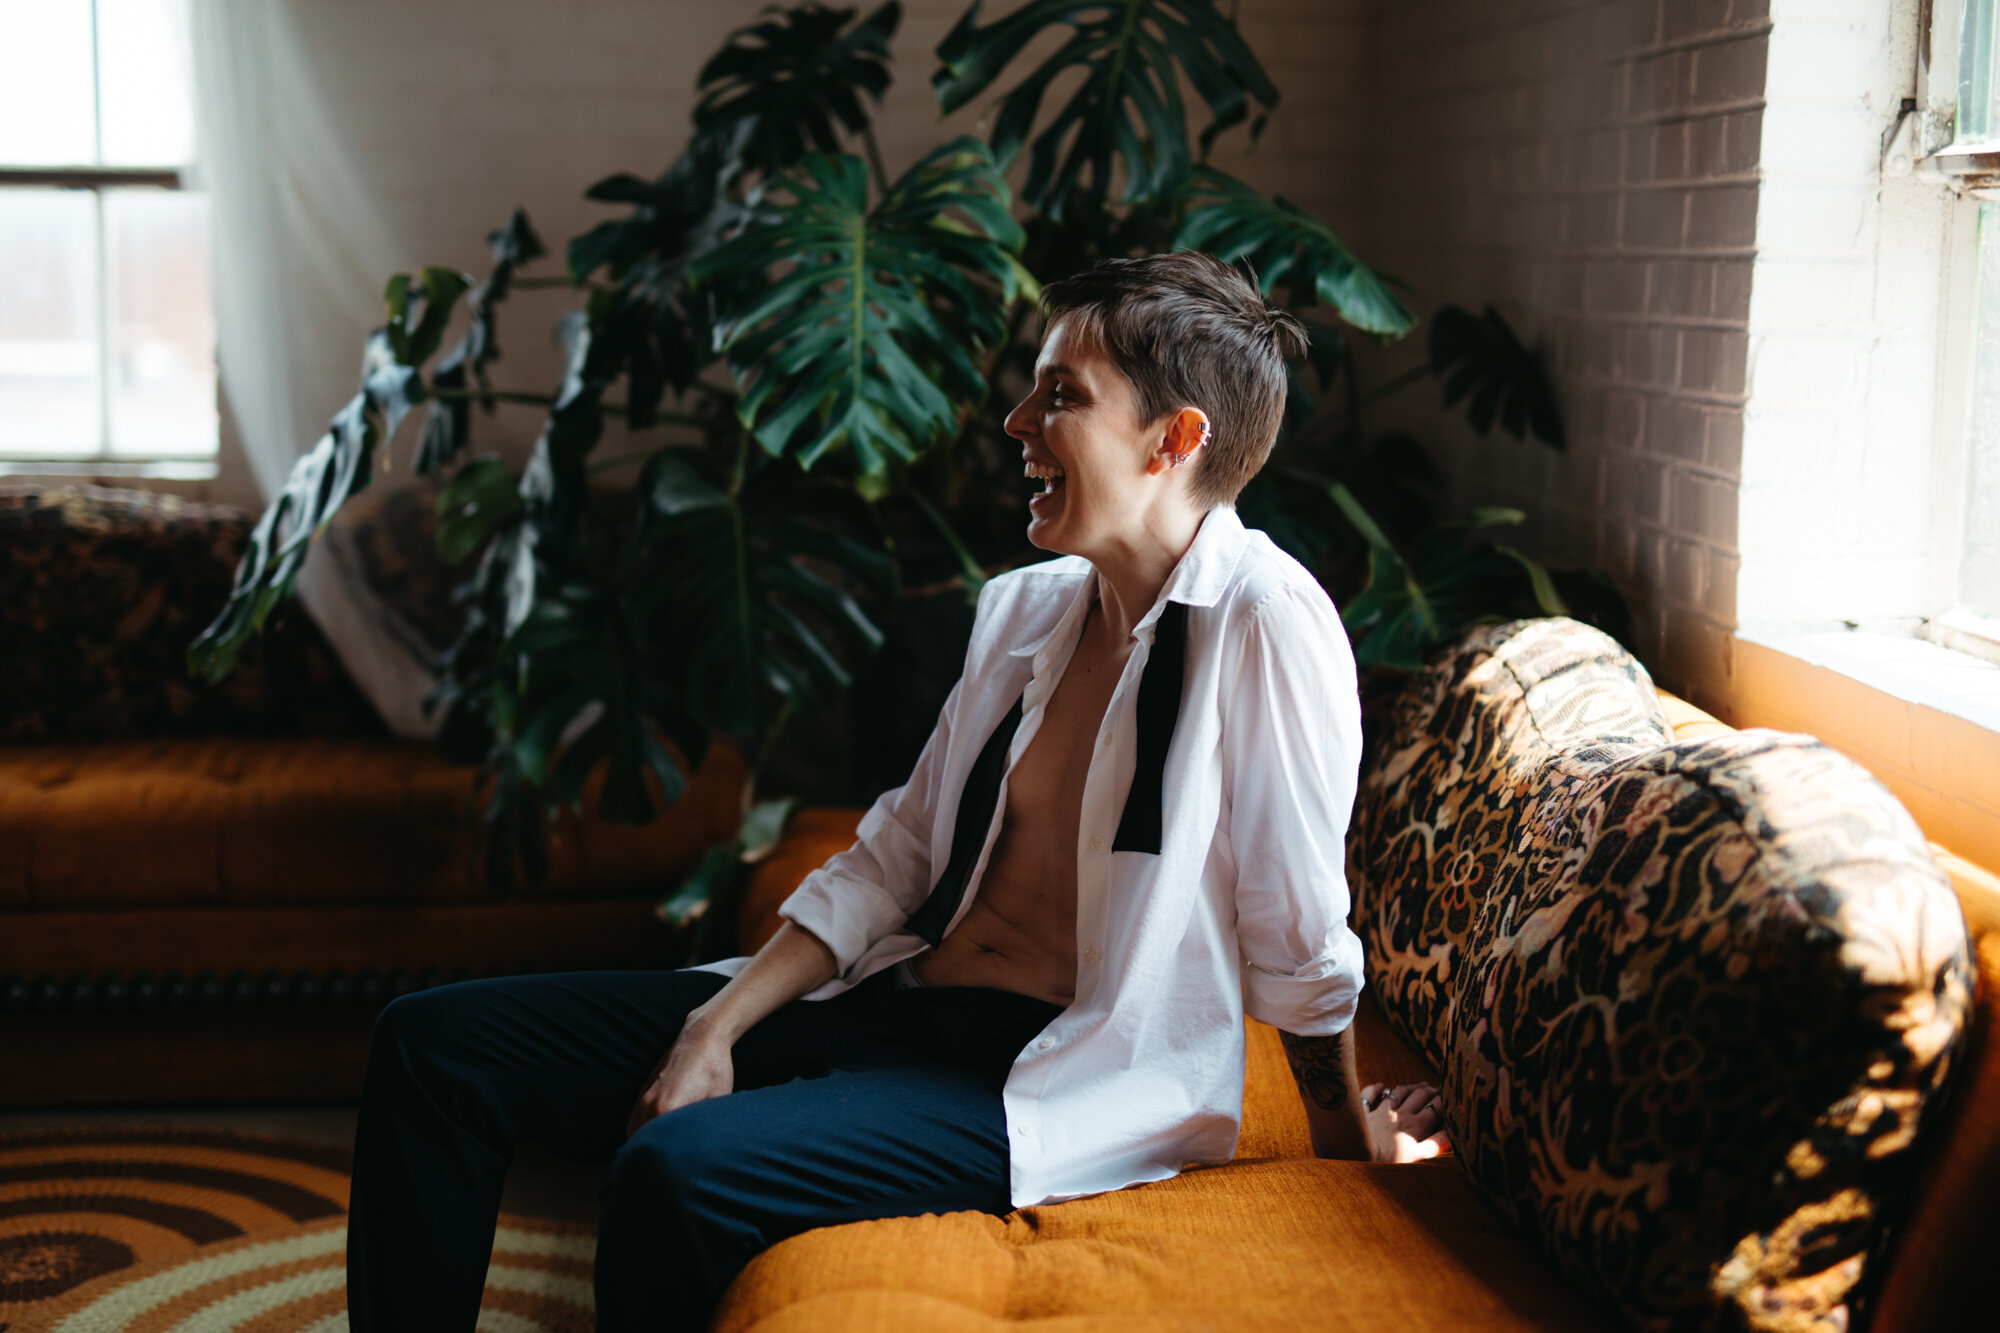 Queer person in masculine attire with shirt unbuttoned sitting on couch and laughing